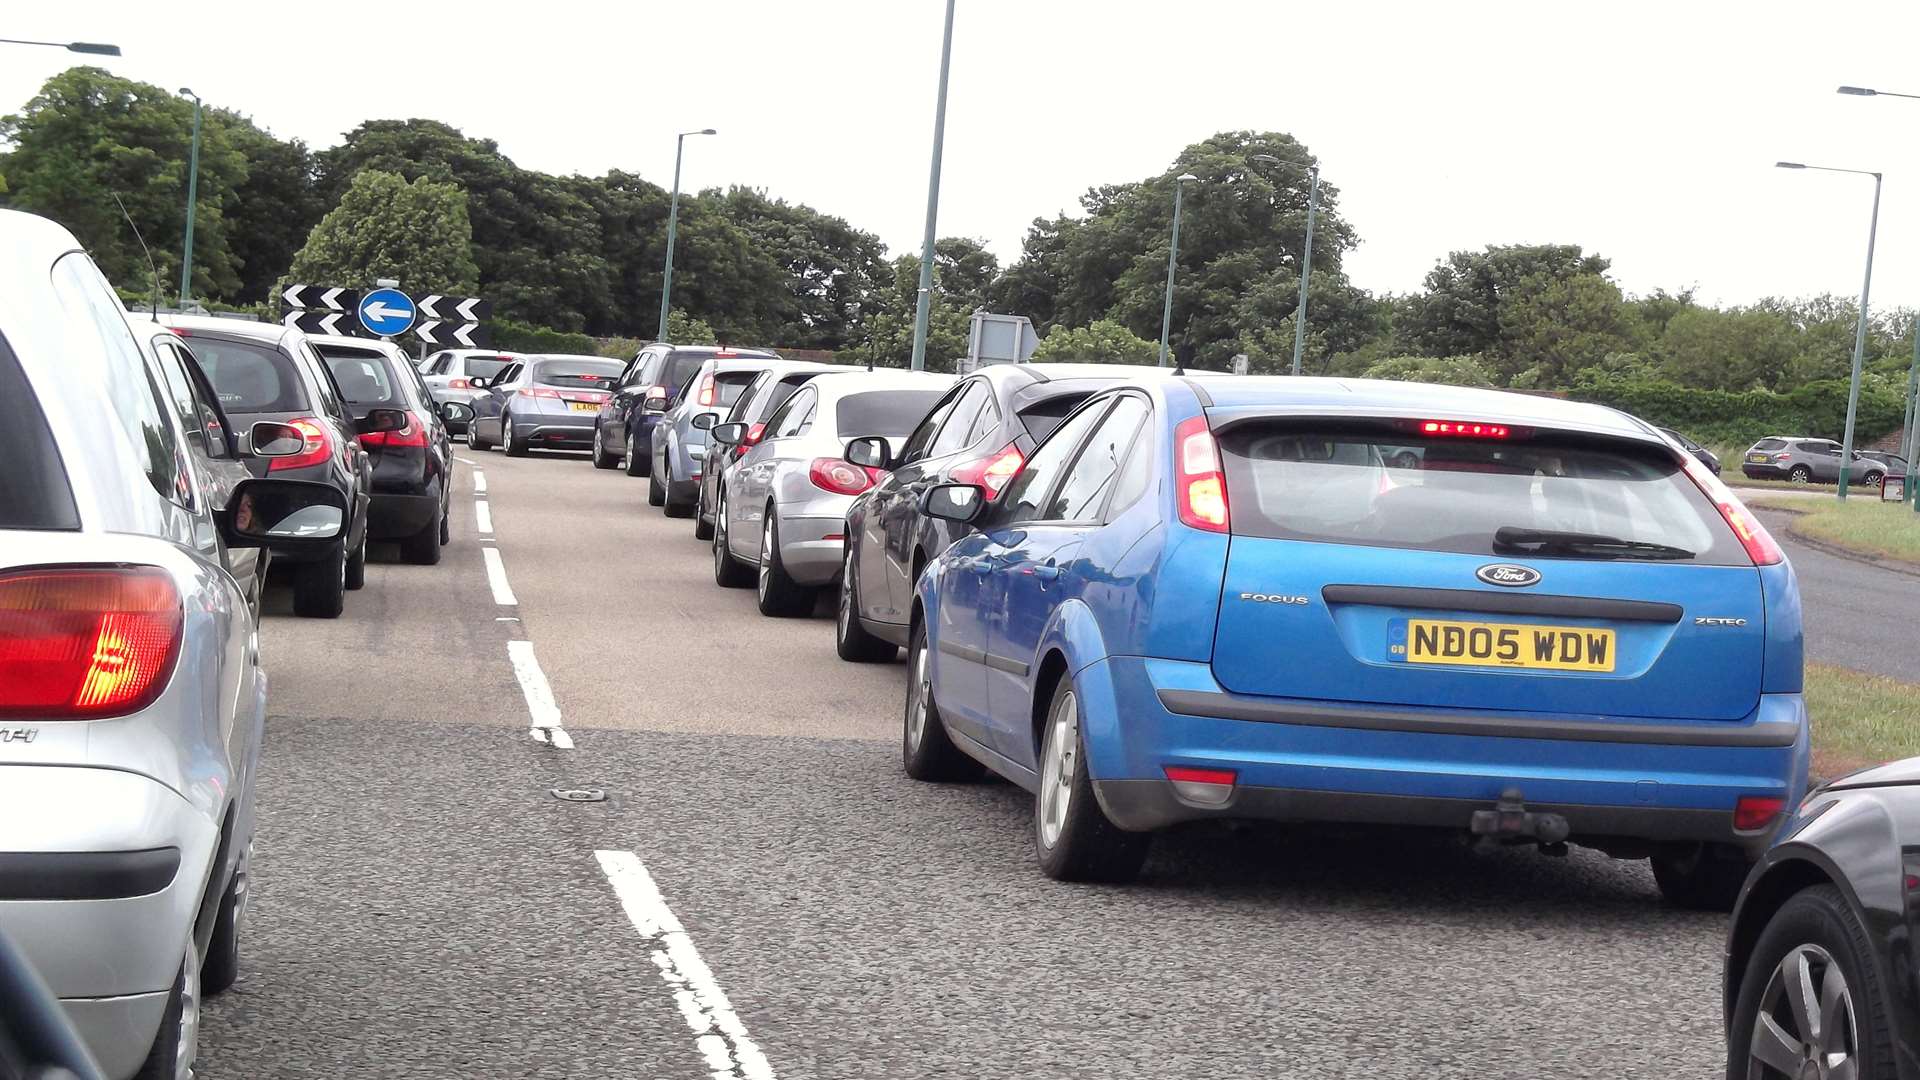 Visitors to the South East Airshow stuck in long delays